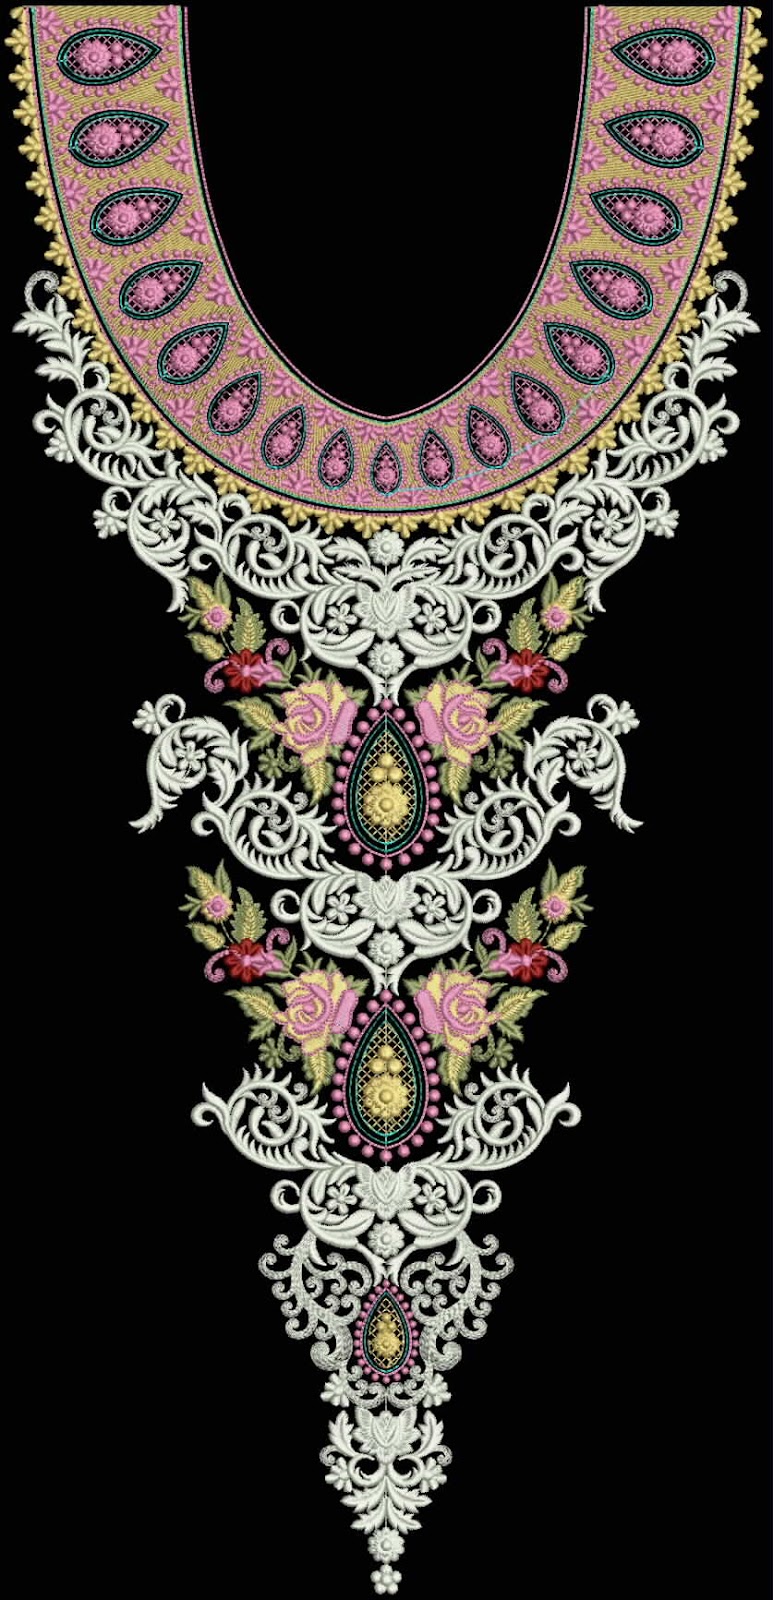 Embroidery Designs: June 2013